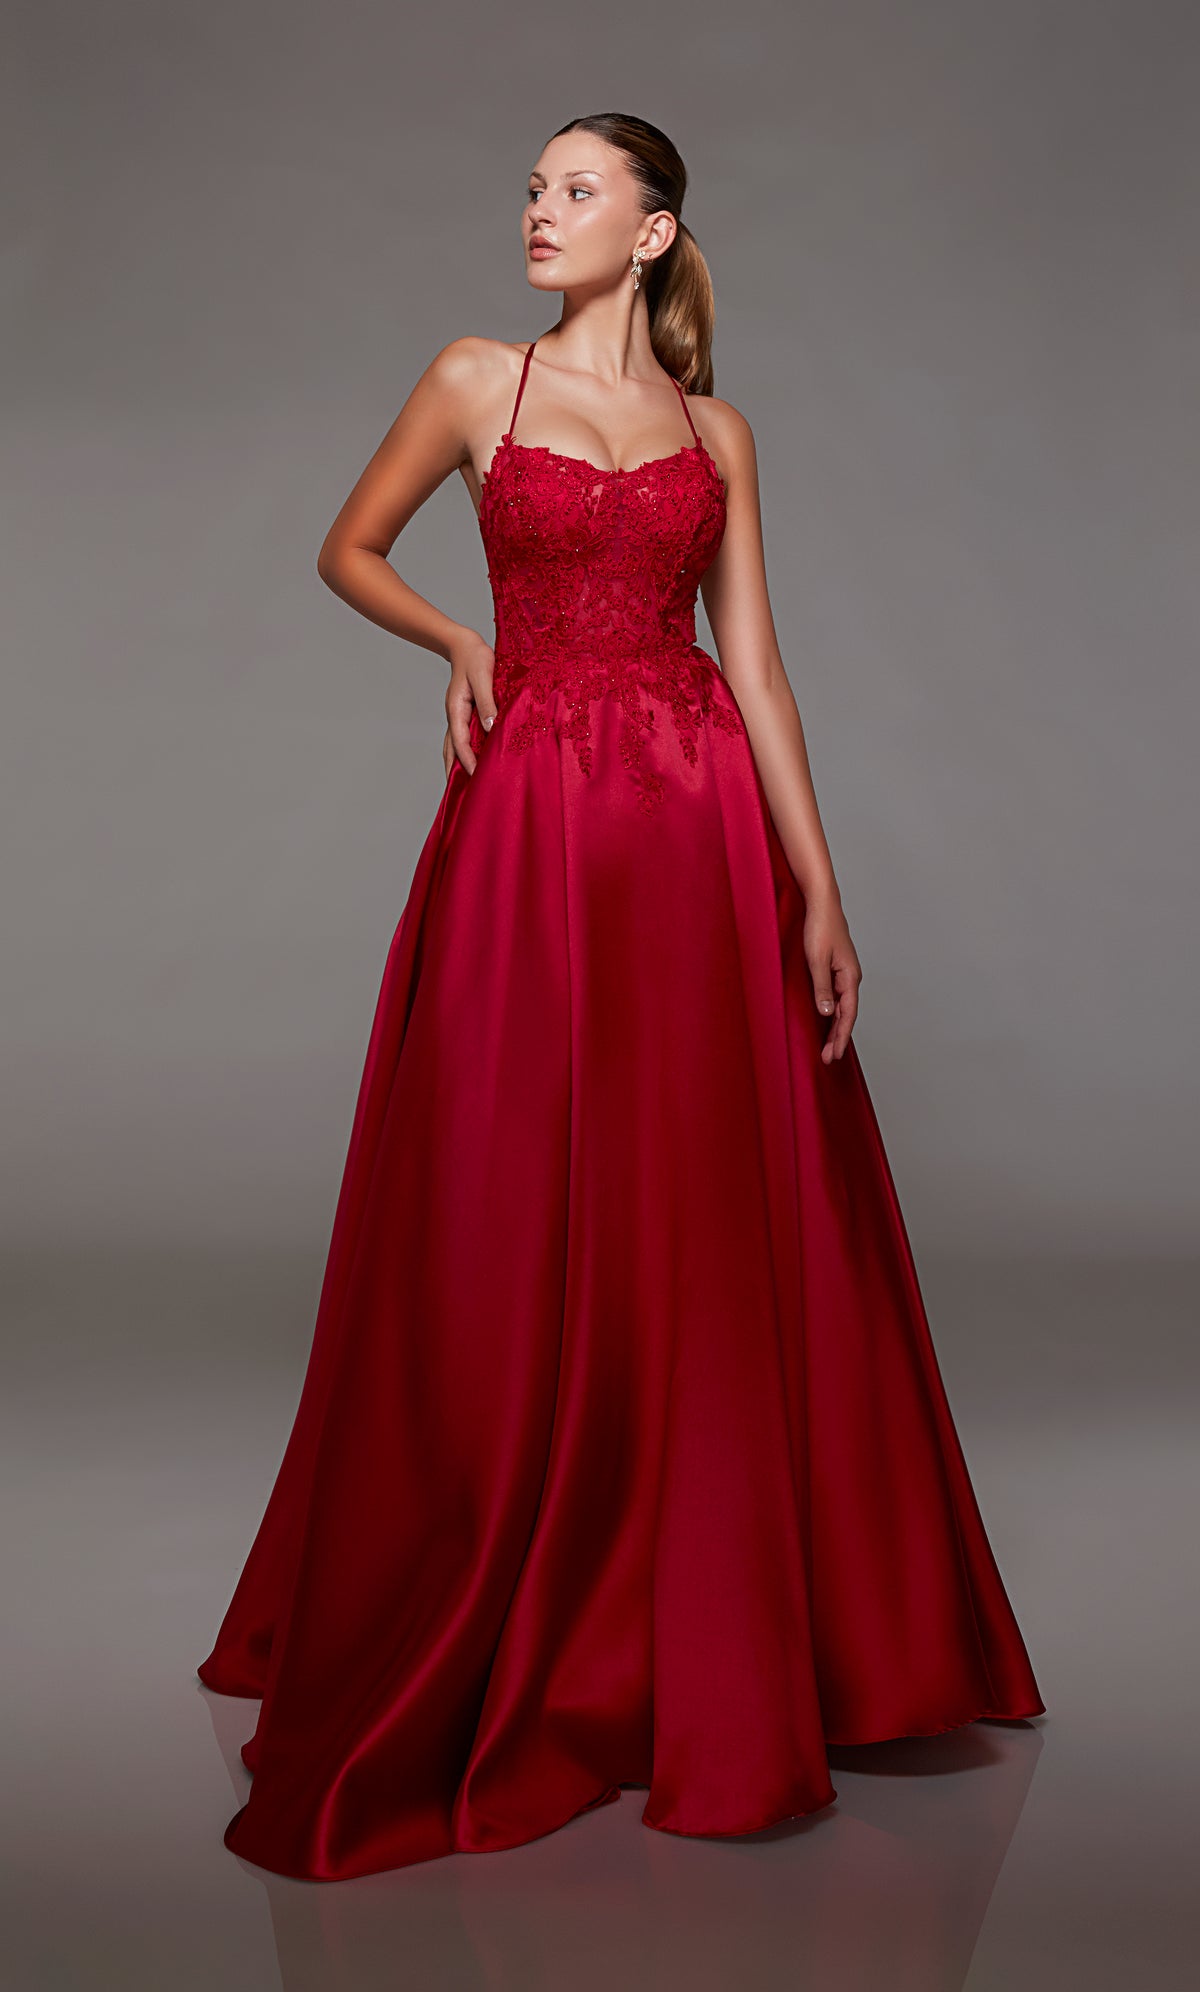 Red mikado ball gown with lace corset, strappy back, and slight train for an stylish and vibrant look.